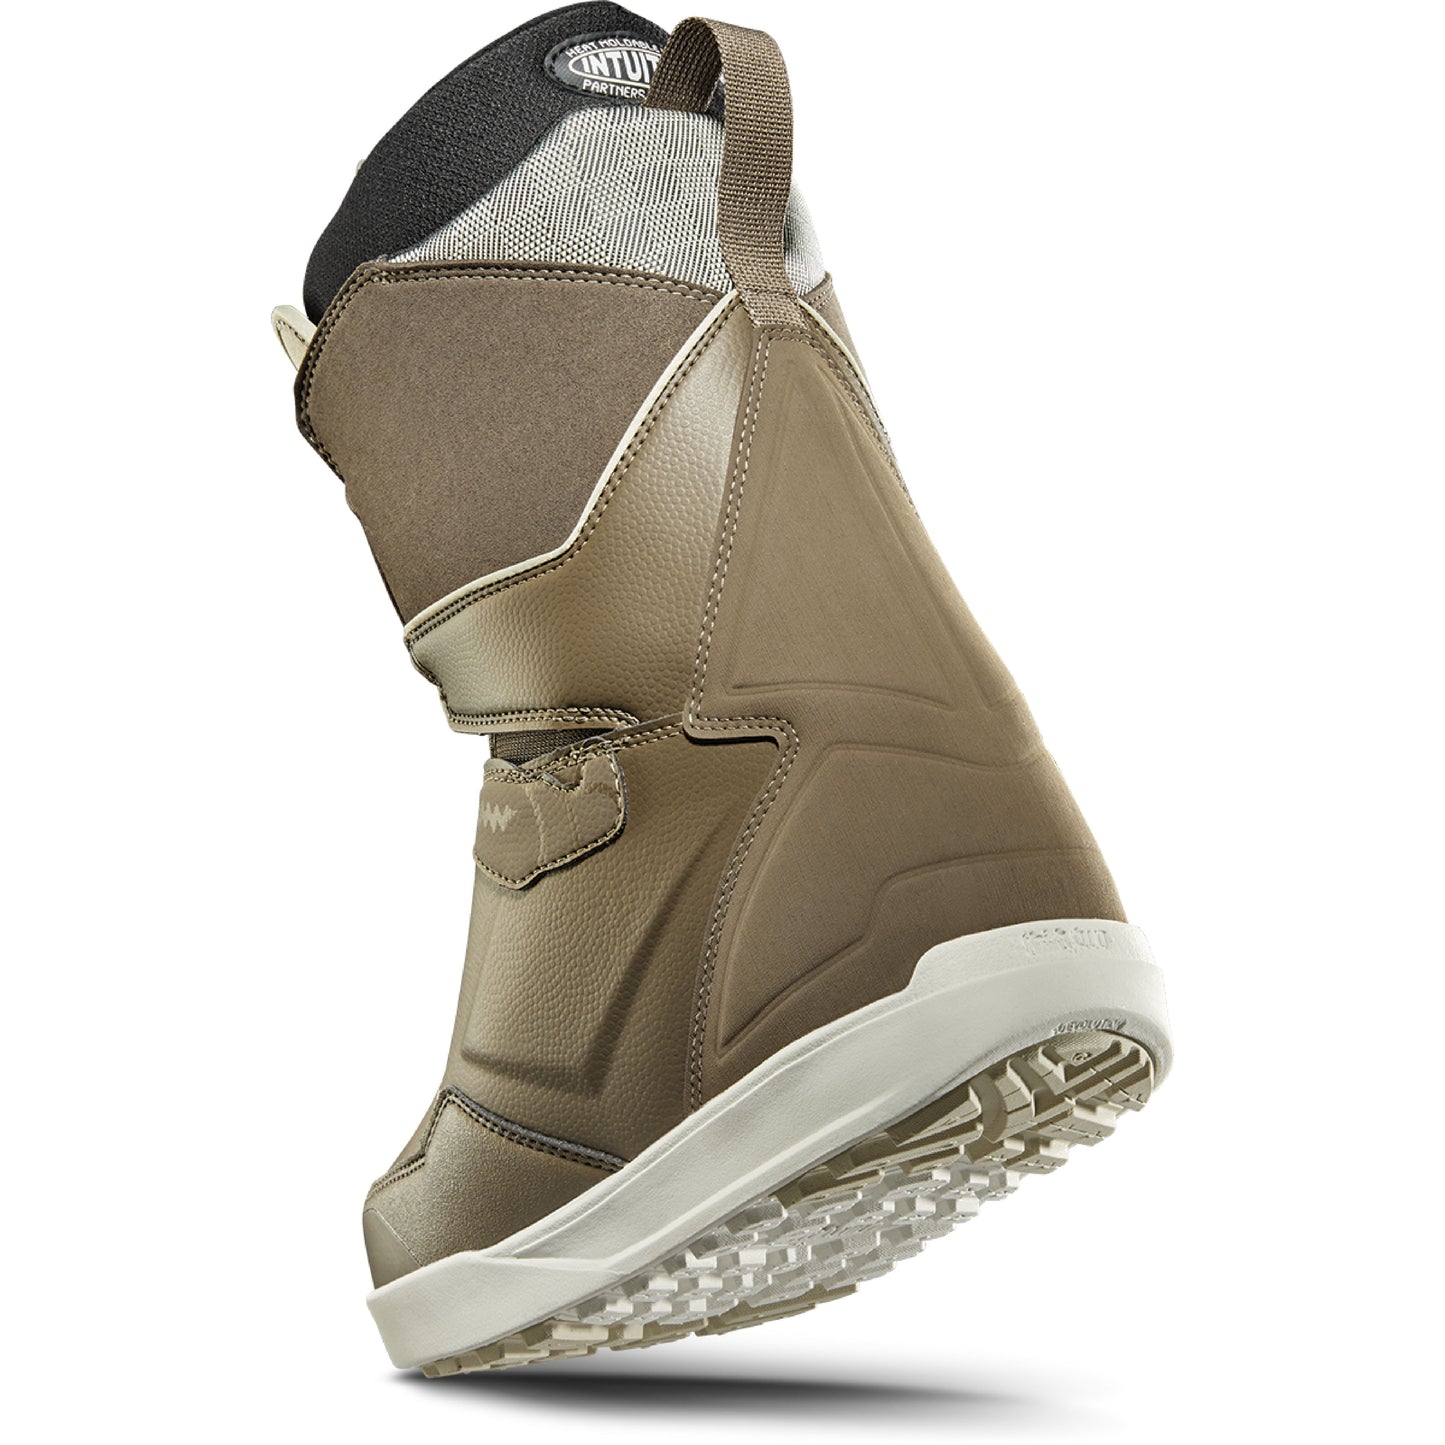 ThirtyTwo Lashed Crab Grab Double BOA Snowboard Boots Brown Tan Snowboard Boots